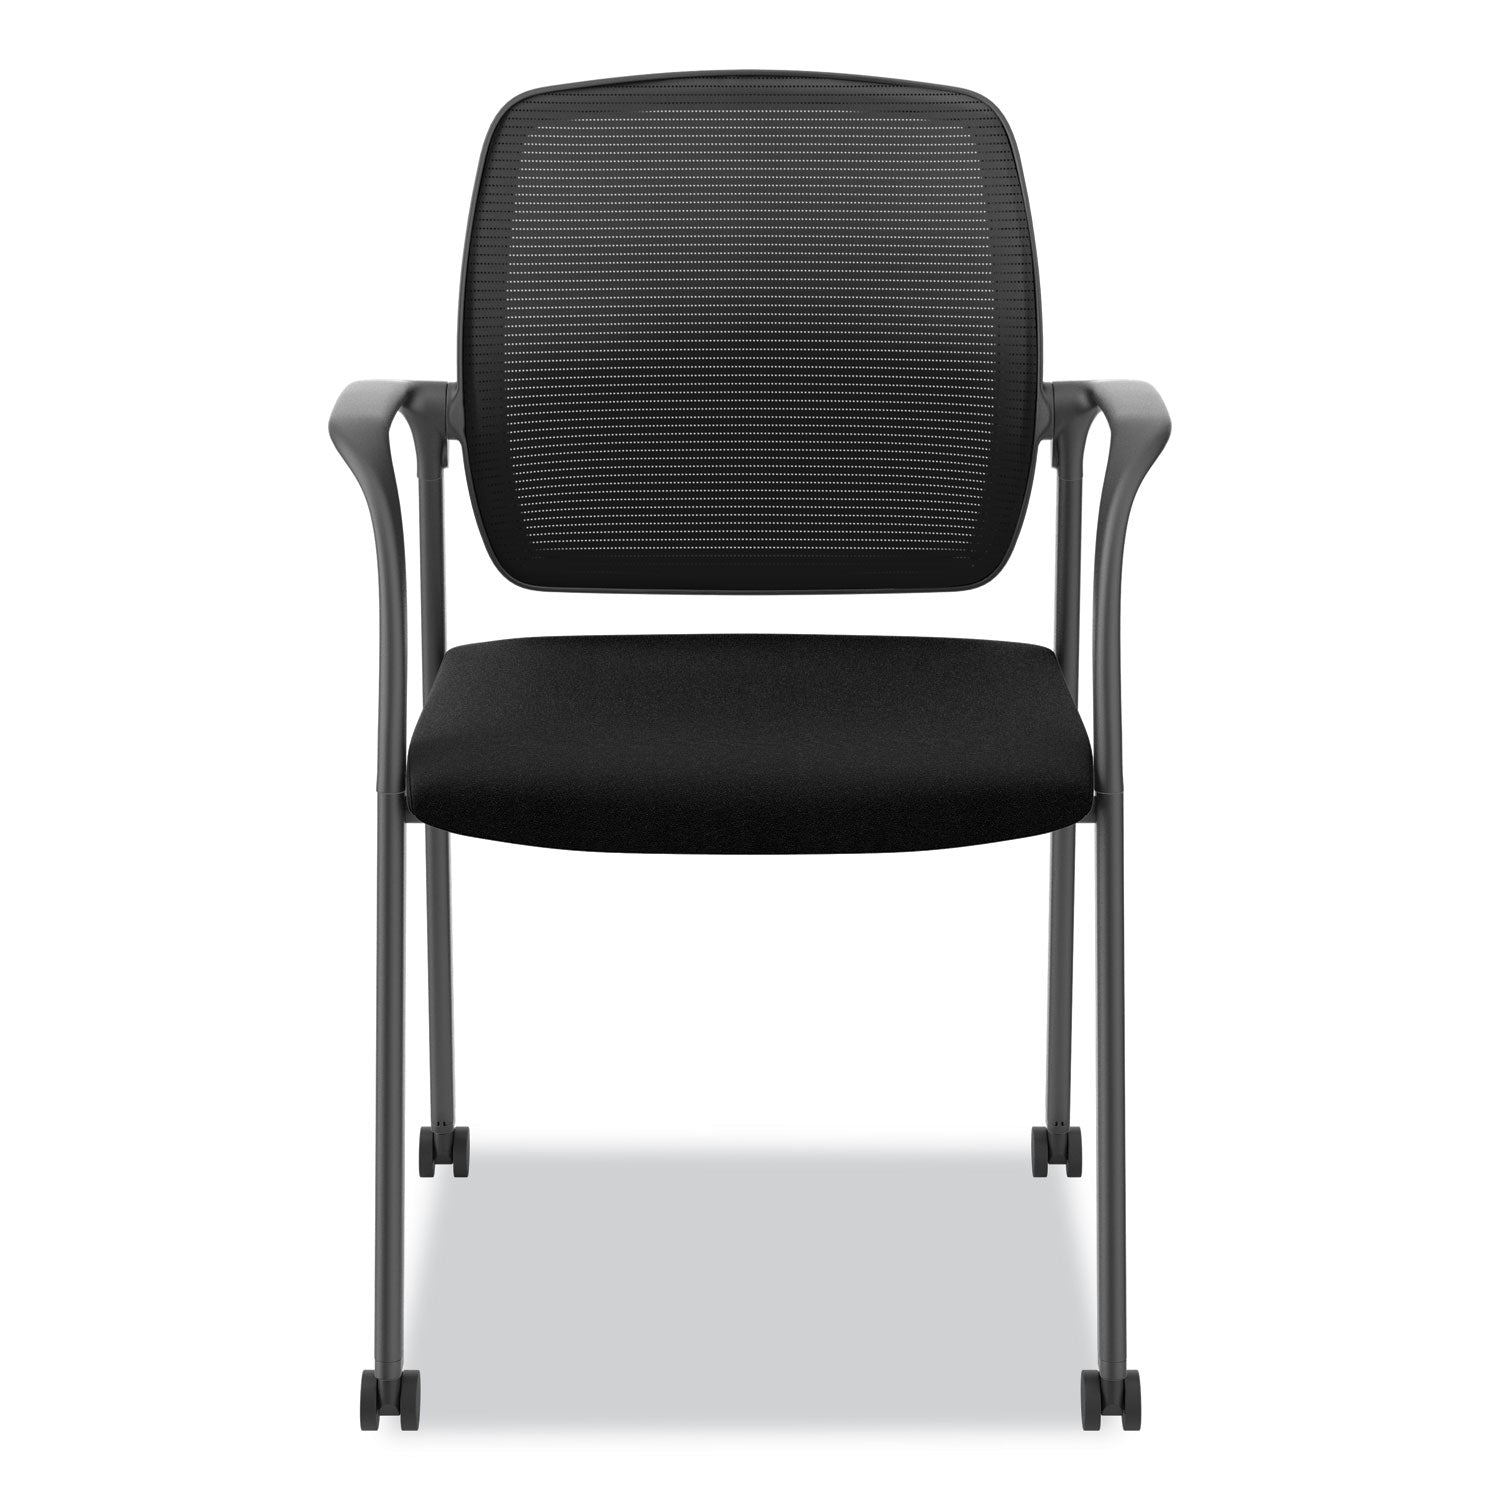 nucleus-series-recharge-guest-chair-supports-up-to-300-lb-1762-seat-height-black-seat-back-black-base_honnr6fmc10p71 - 3